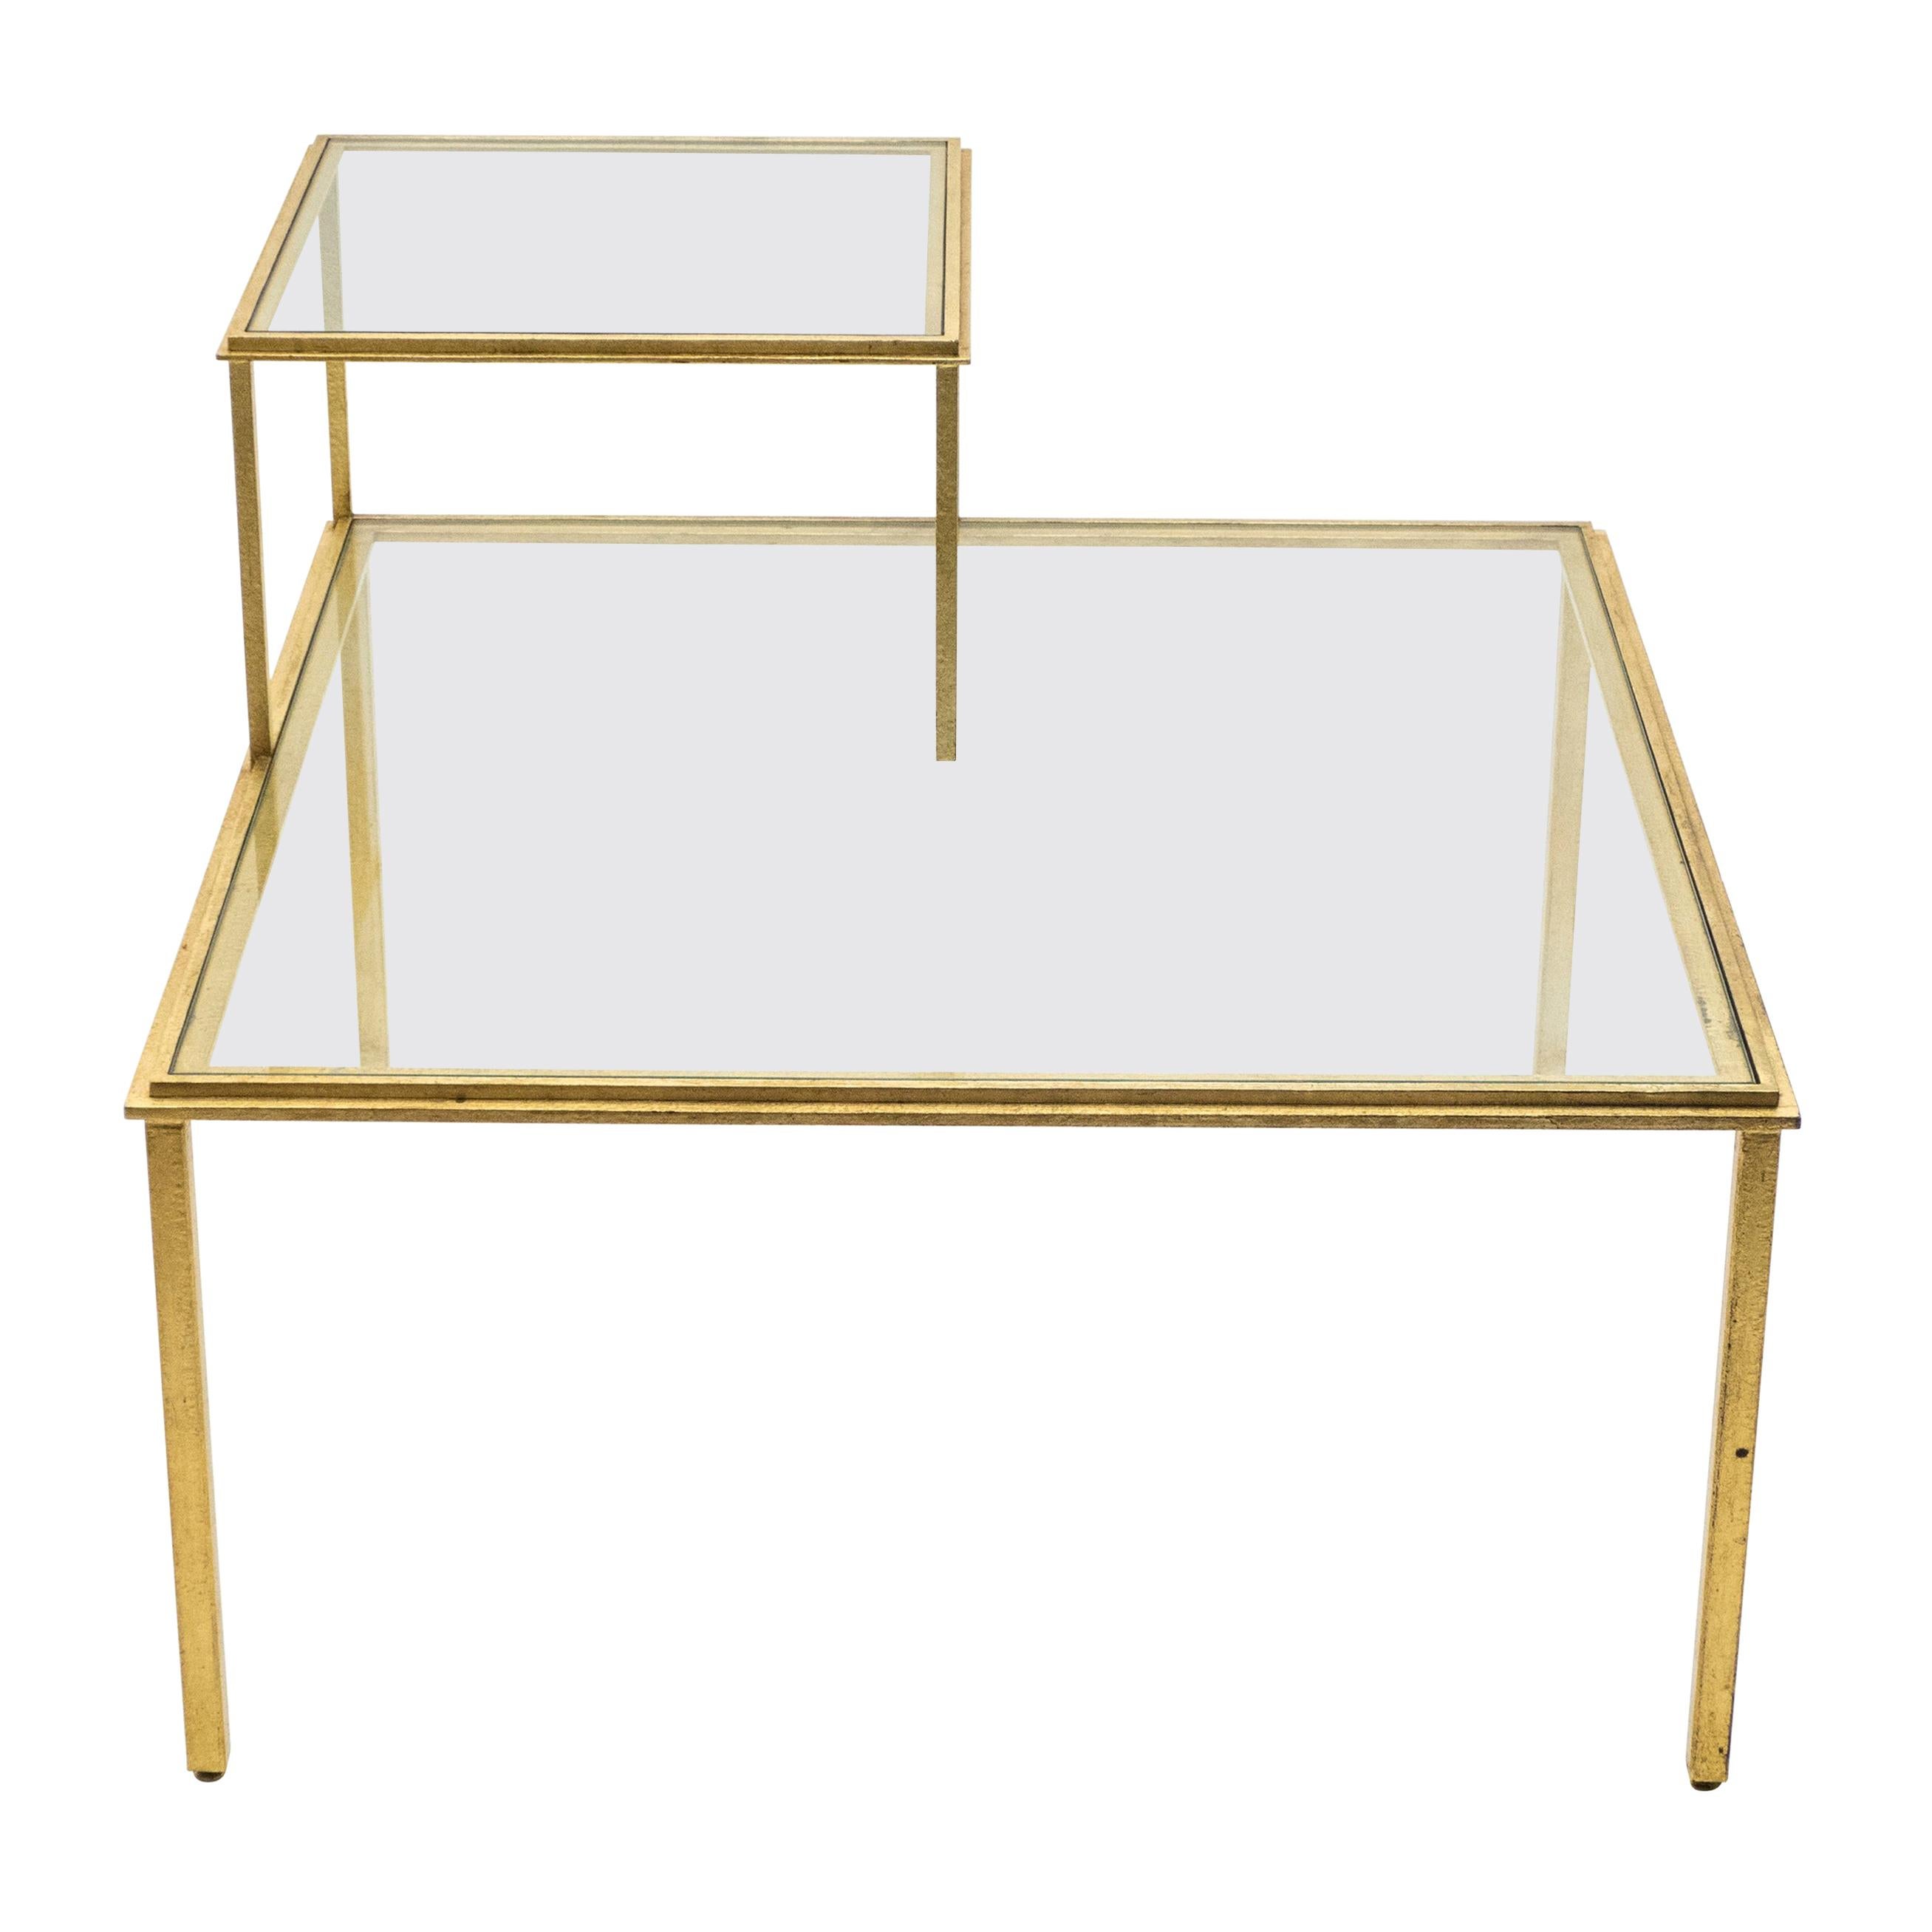 Roger Thibier Gilt Wrought Iron Glass Coffee or End Table, 1960s For Sale